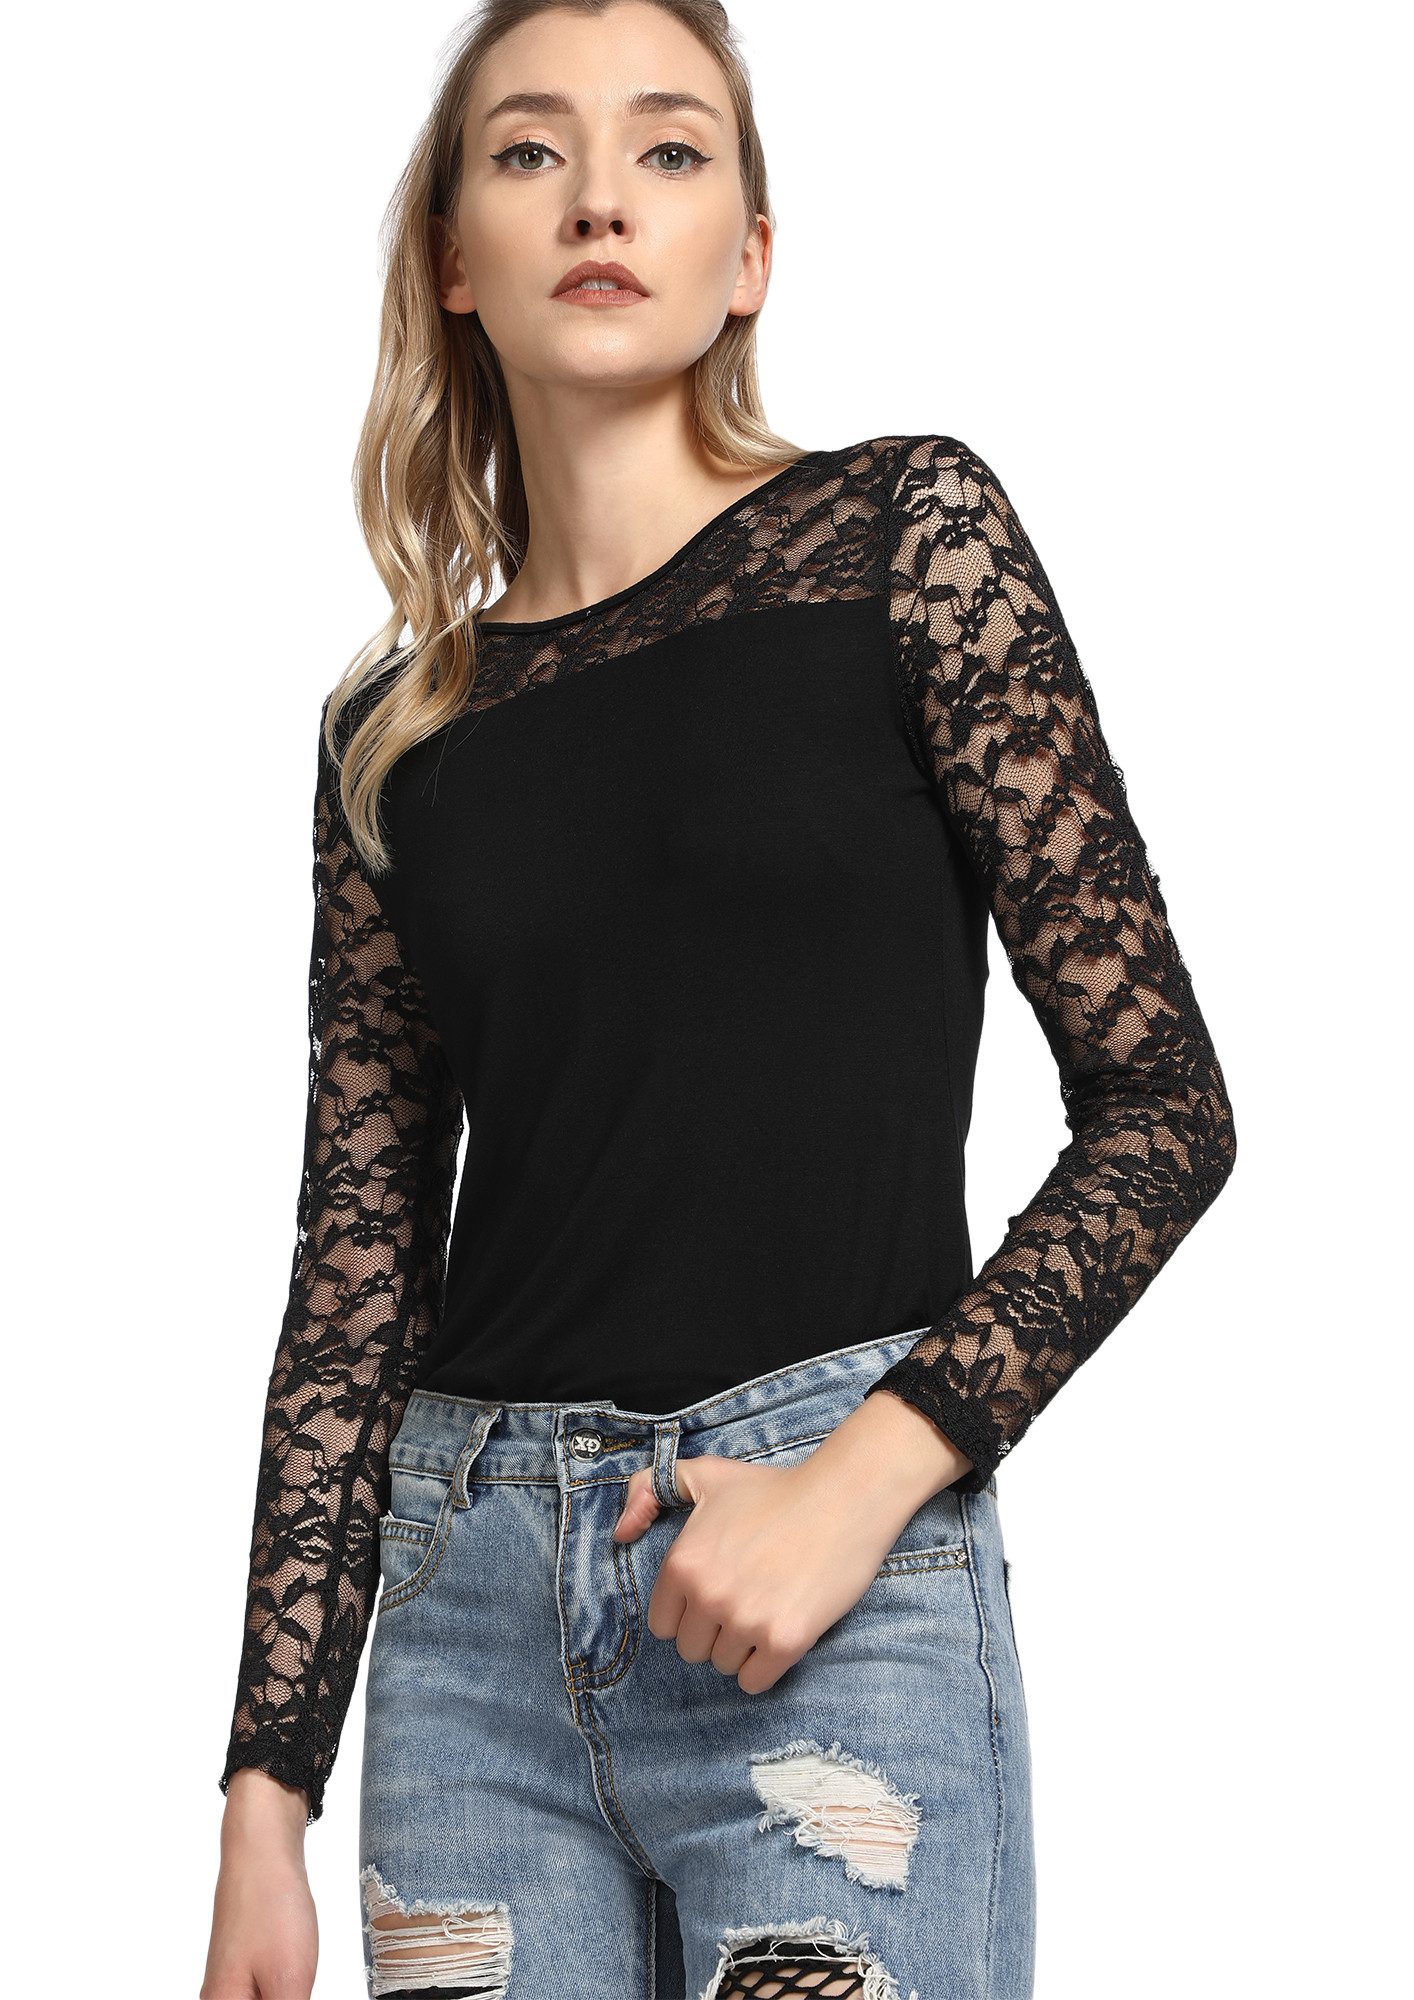 HOW FINE IS YOUR MESH BLACK TOP